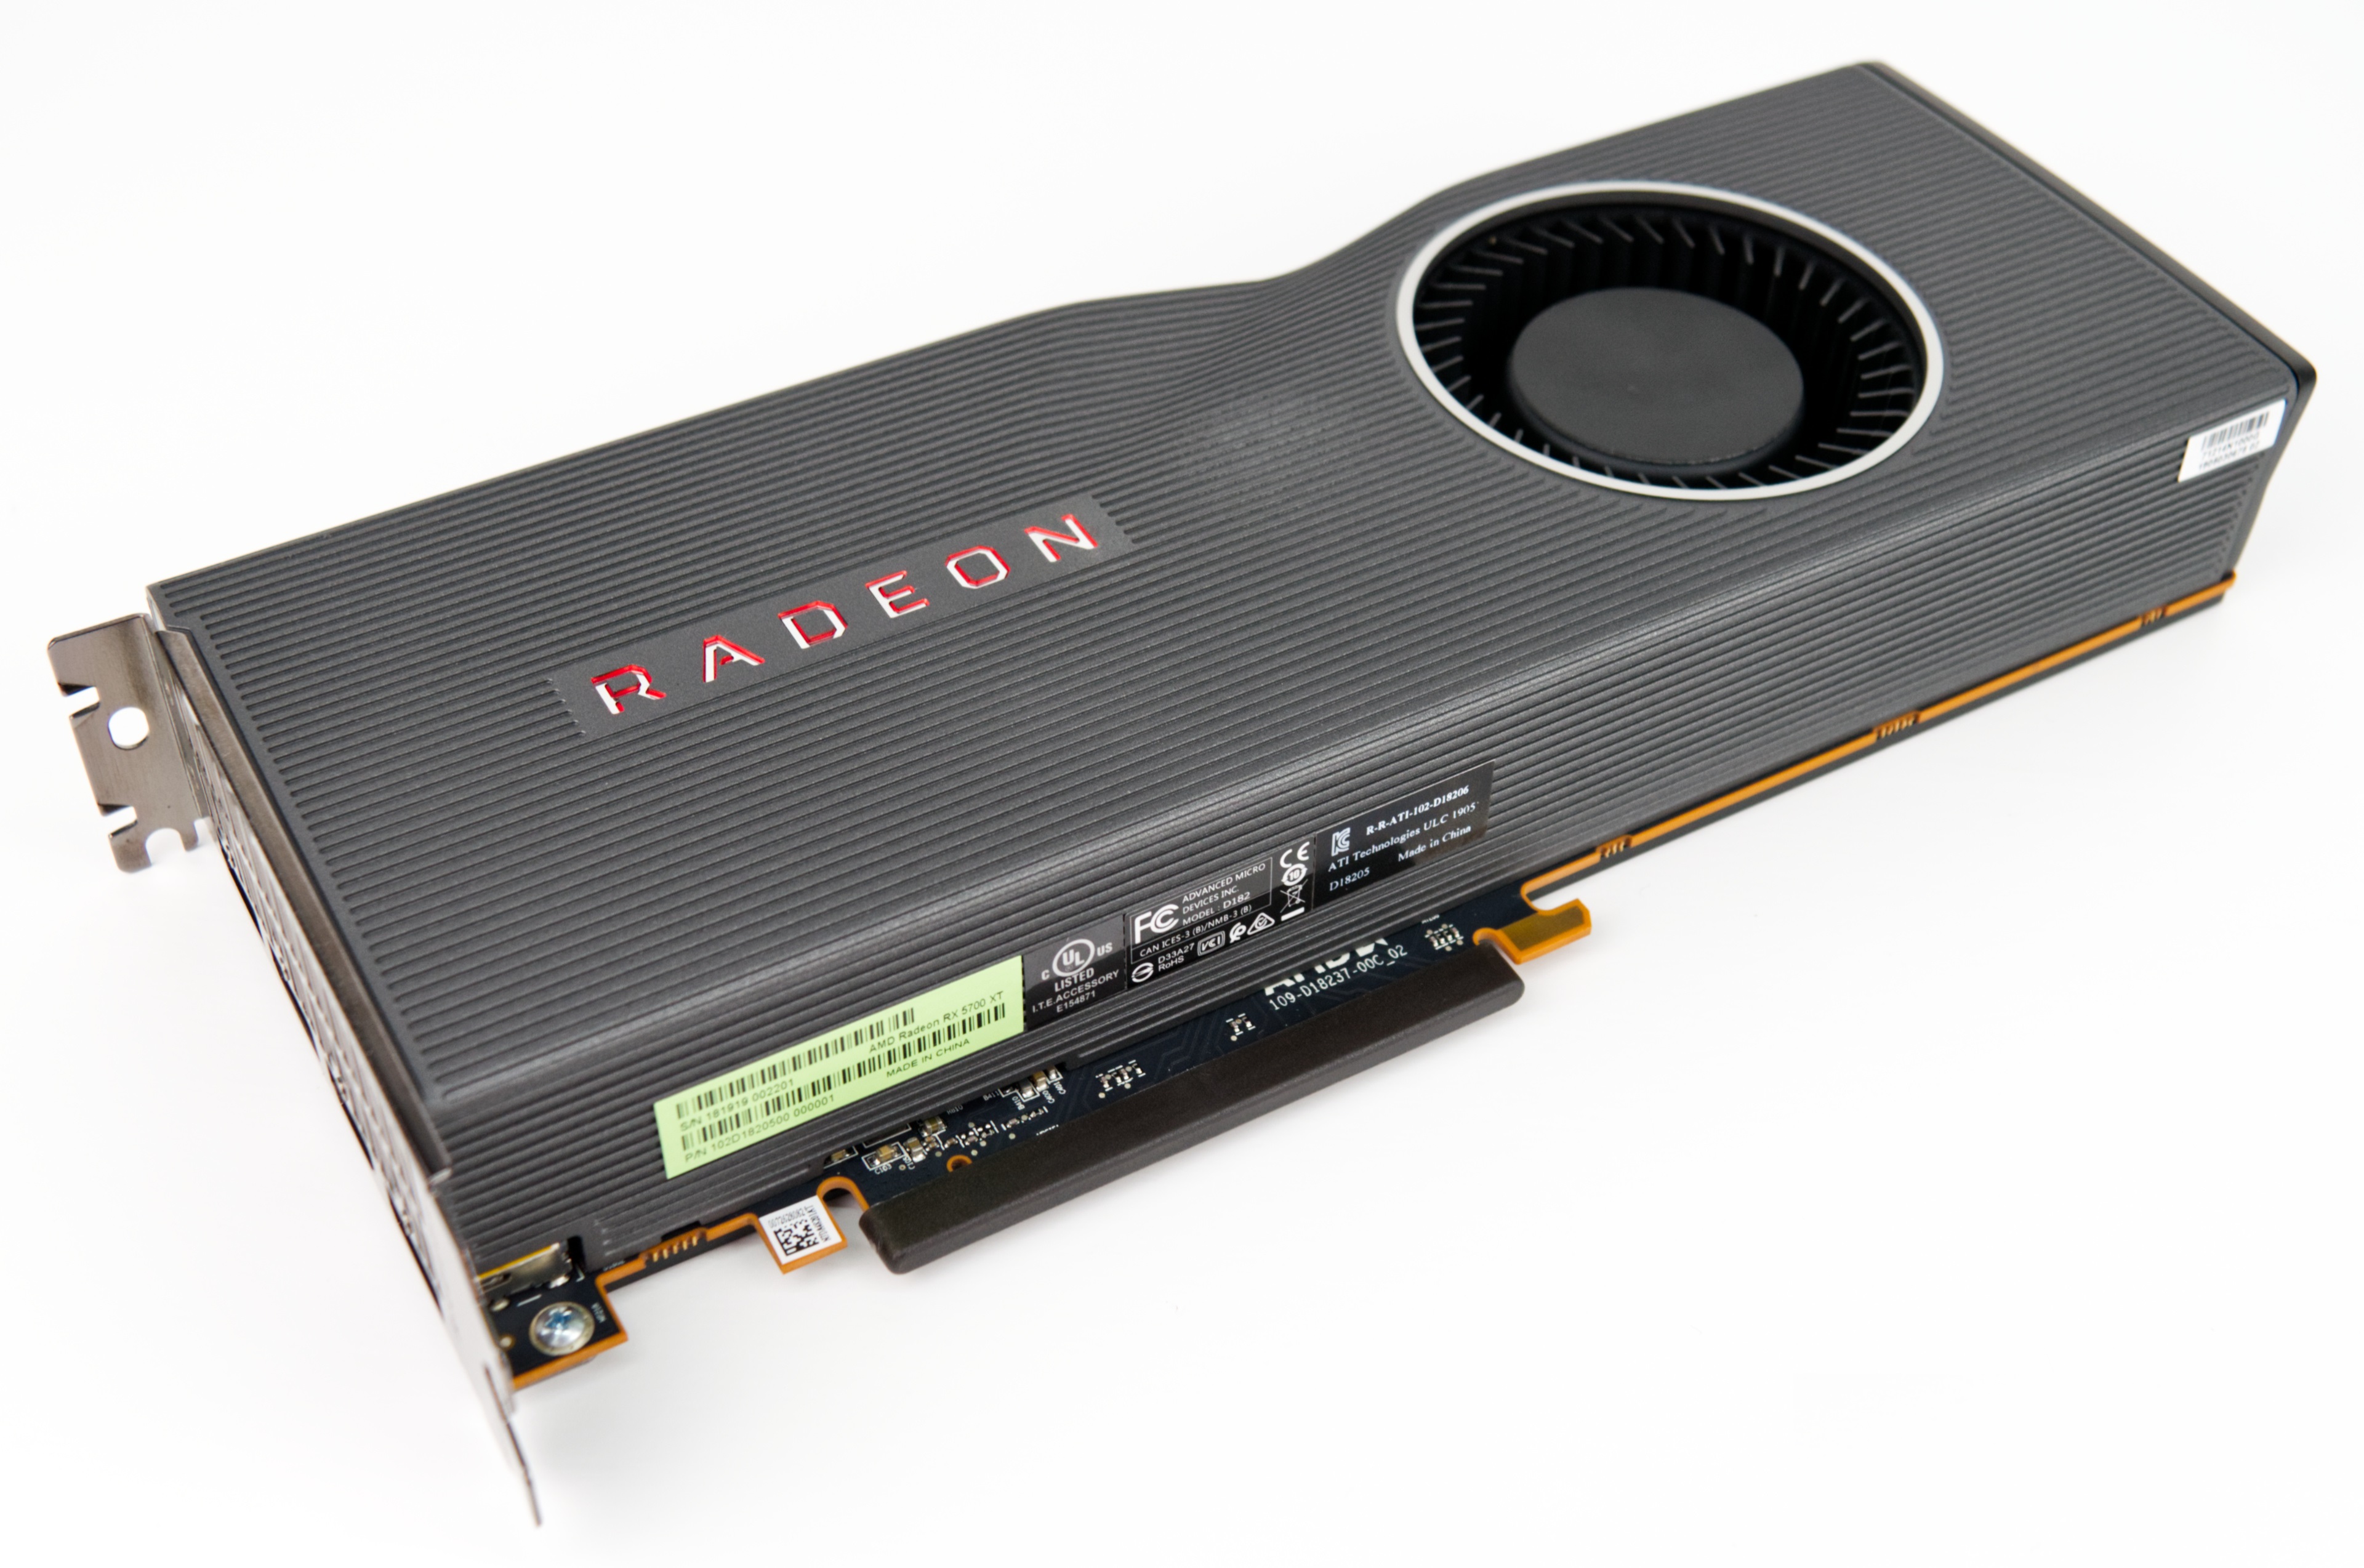 AMD Radeon RX 5700 XT Review: Known issues of the reference design -   Reviews